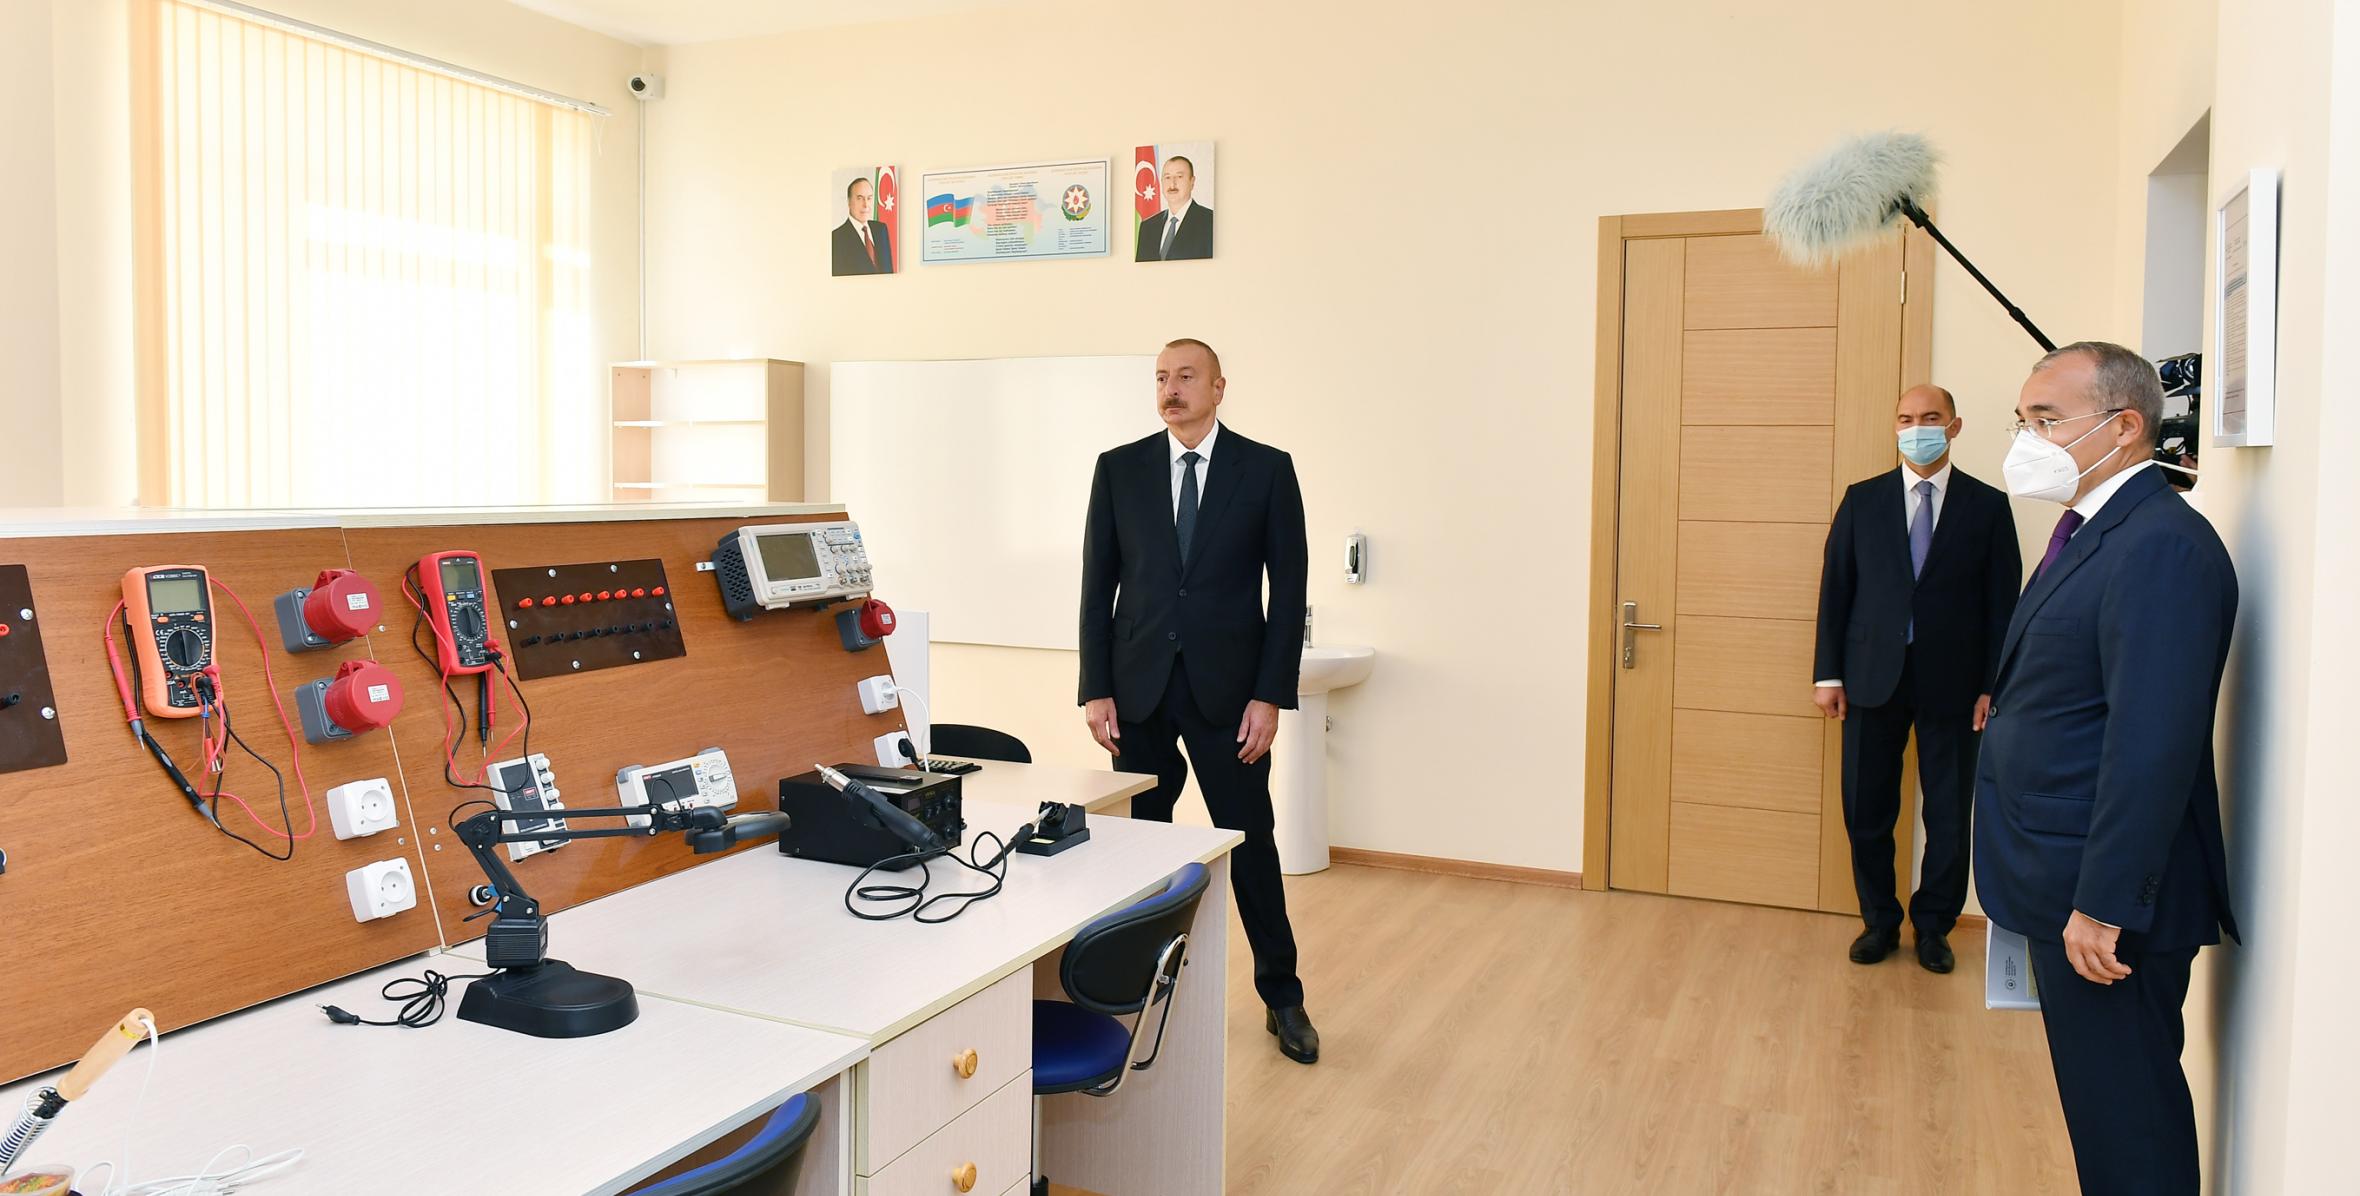 lham Aliyev attended the inauguration of the Vocational Education Center in Sumgayit